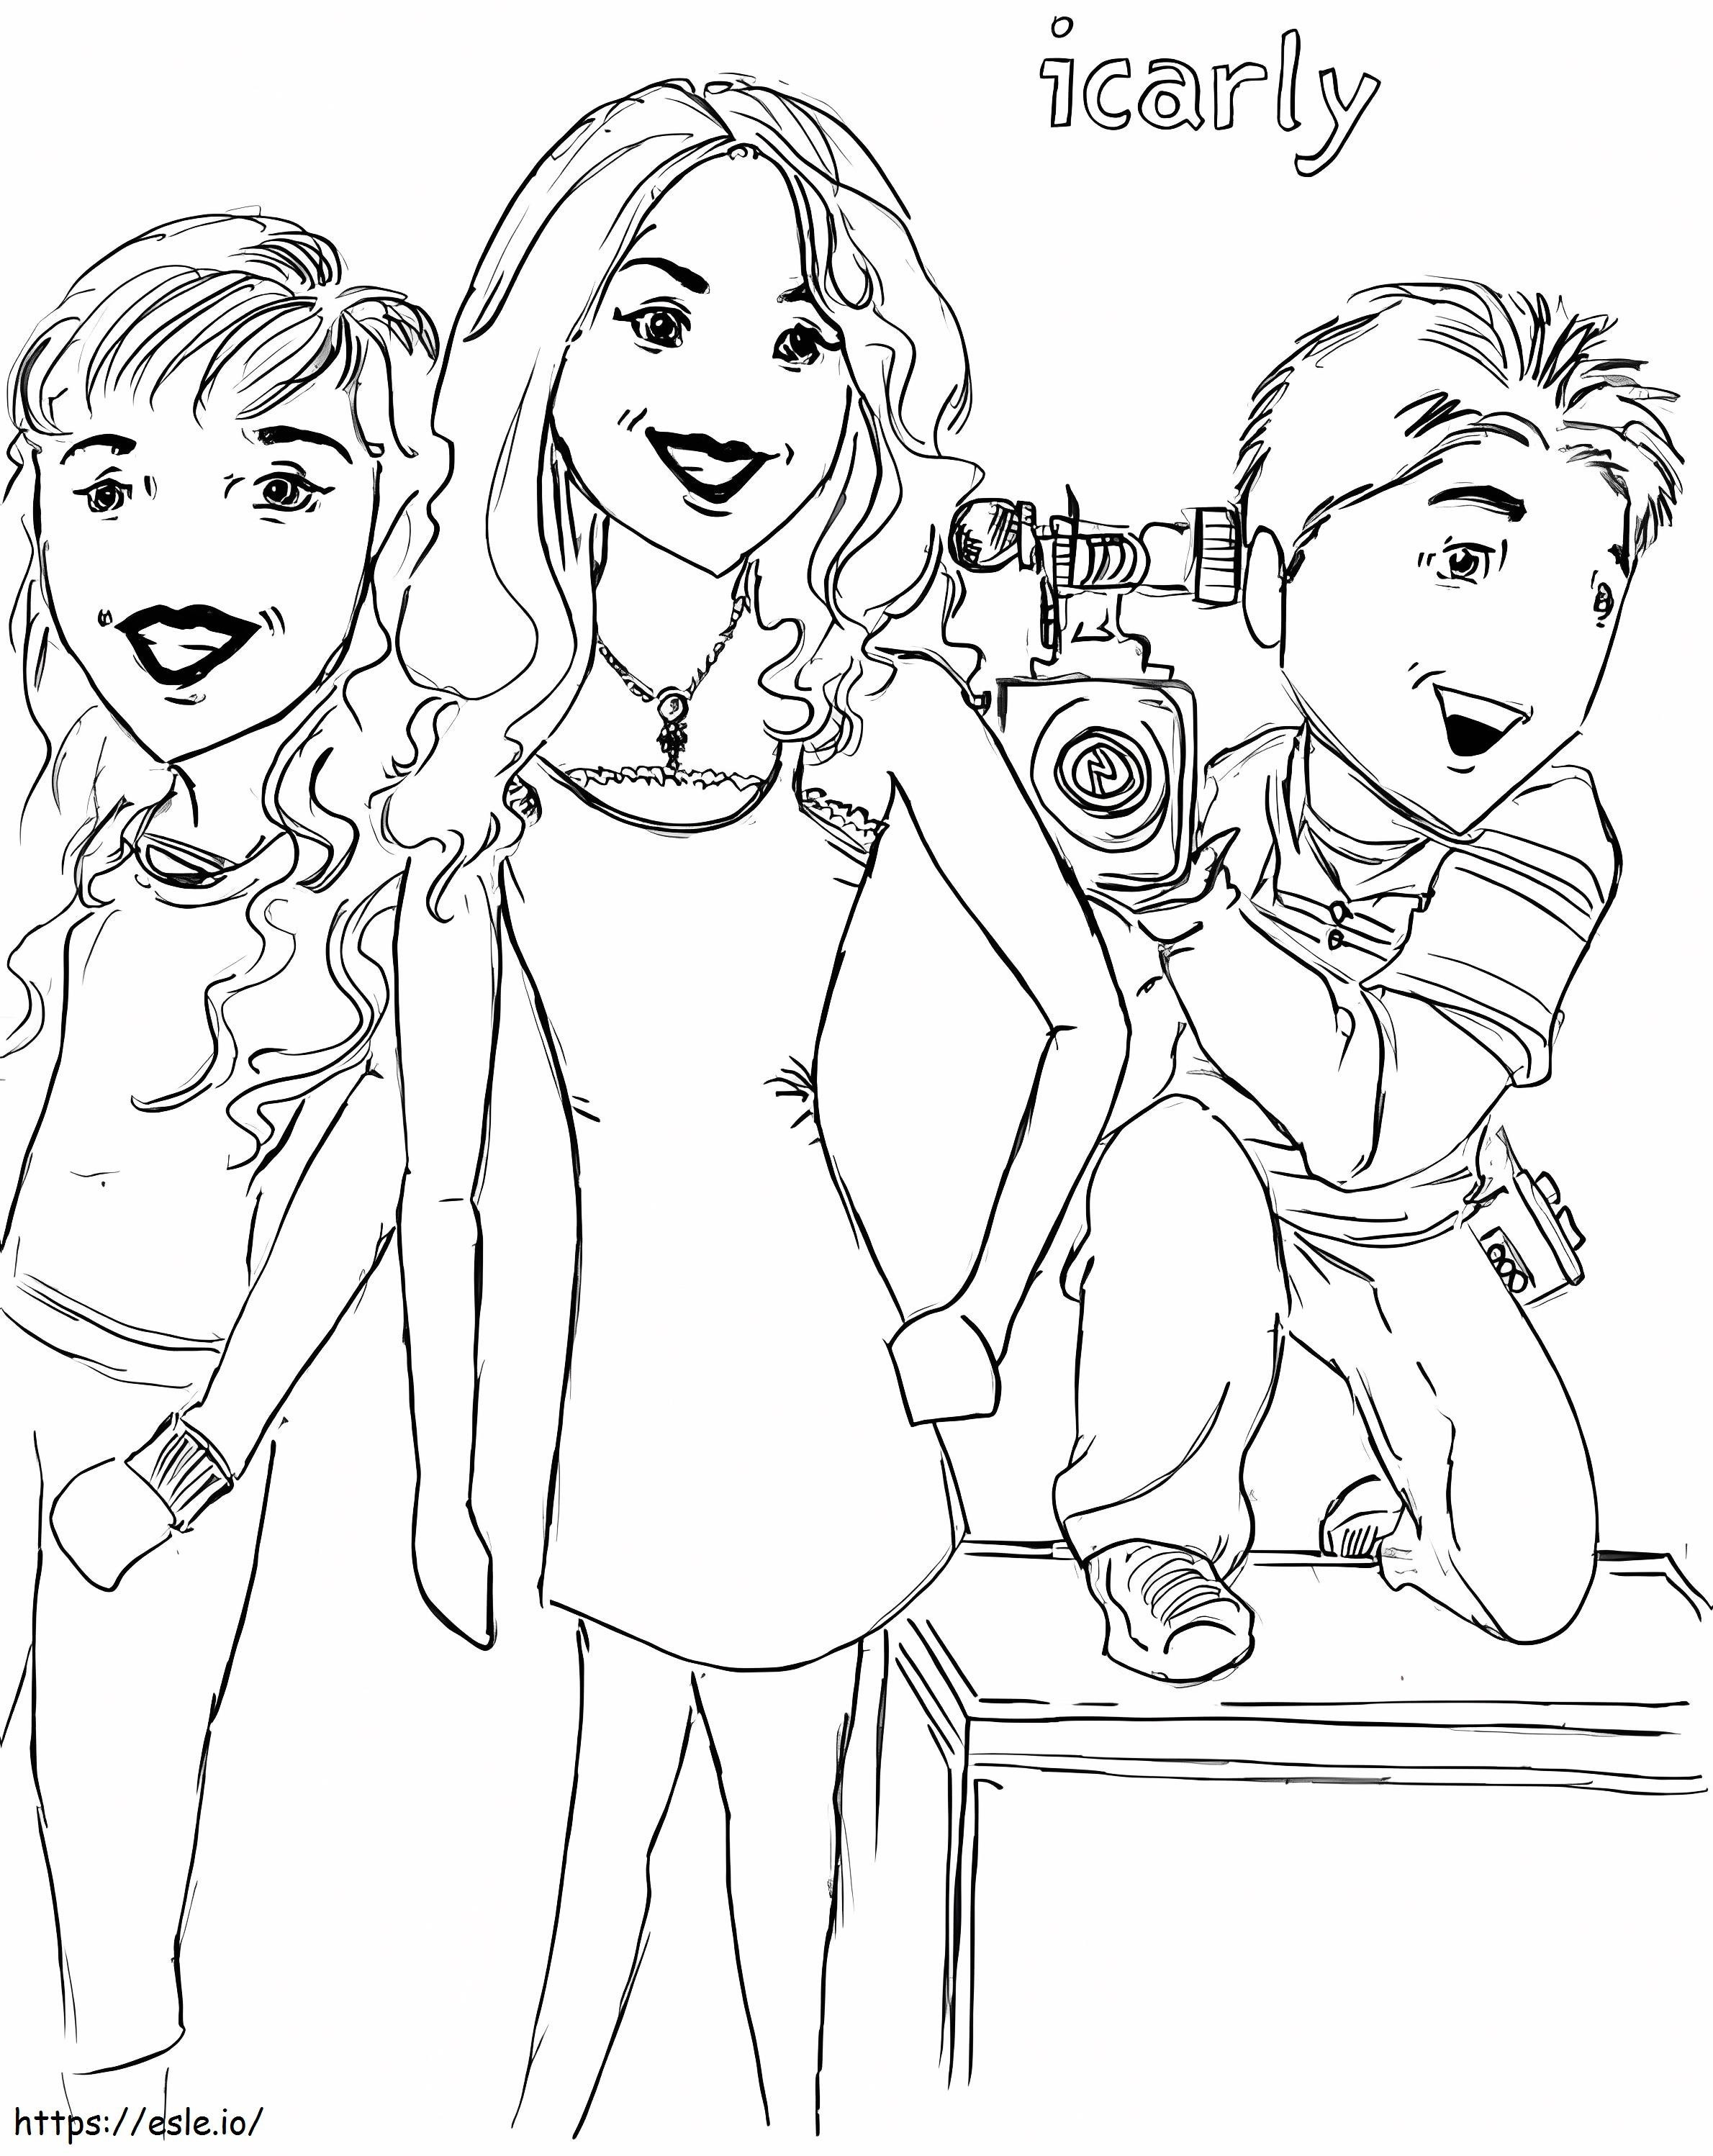 ICarly Sketch coloring page